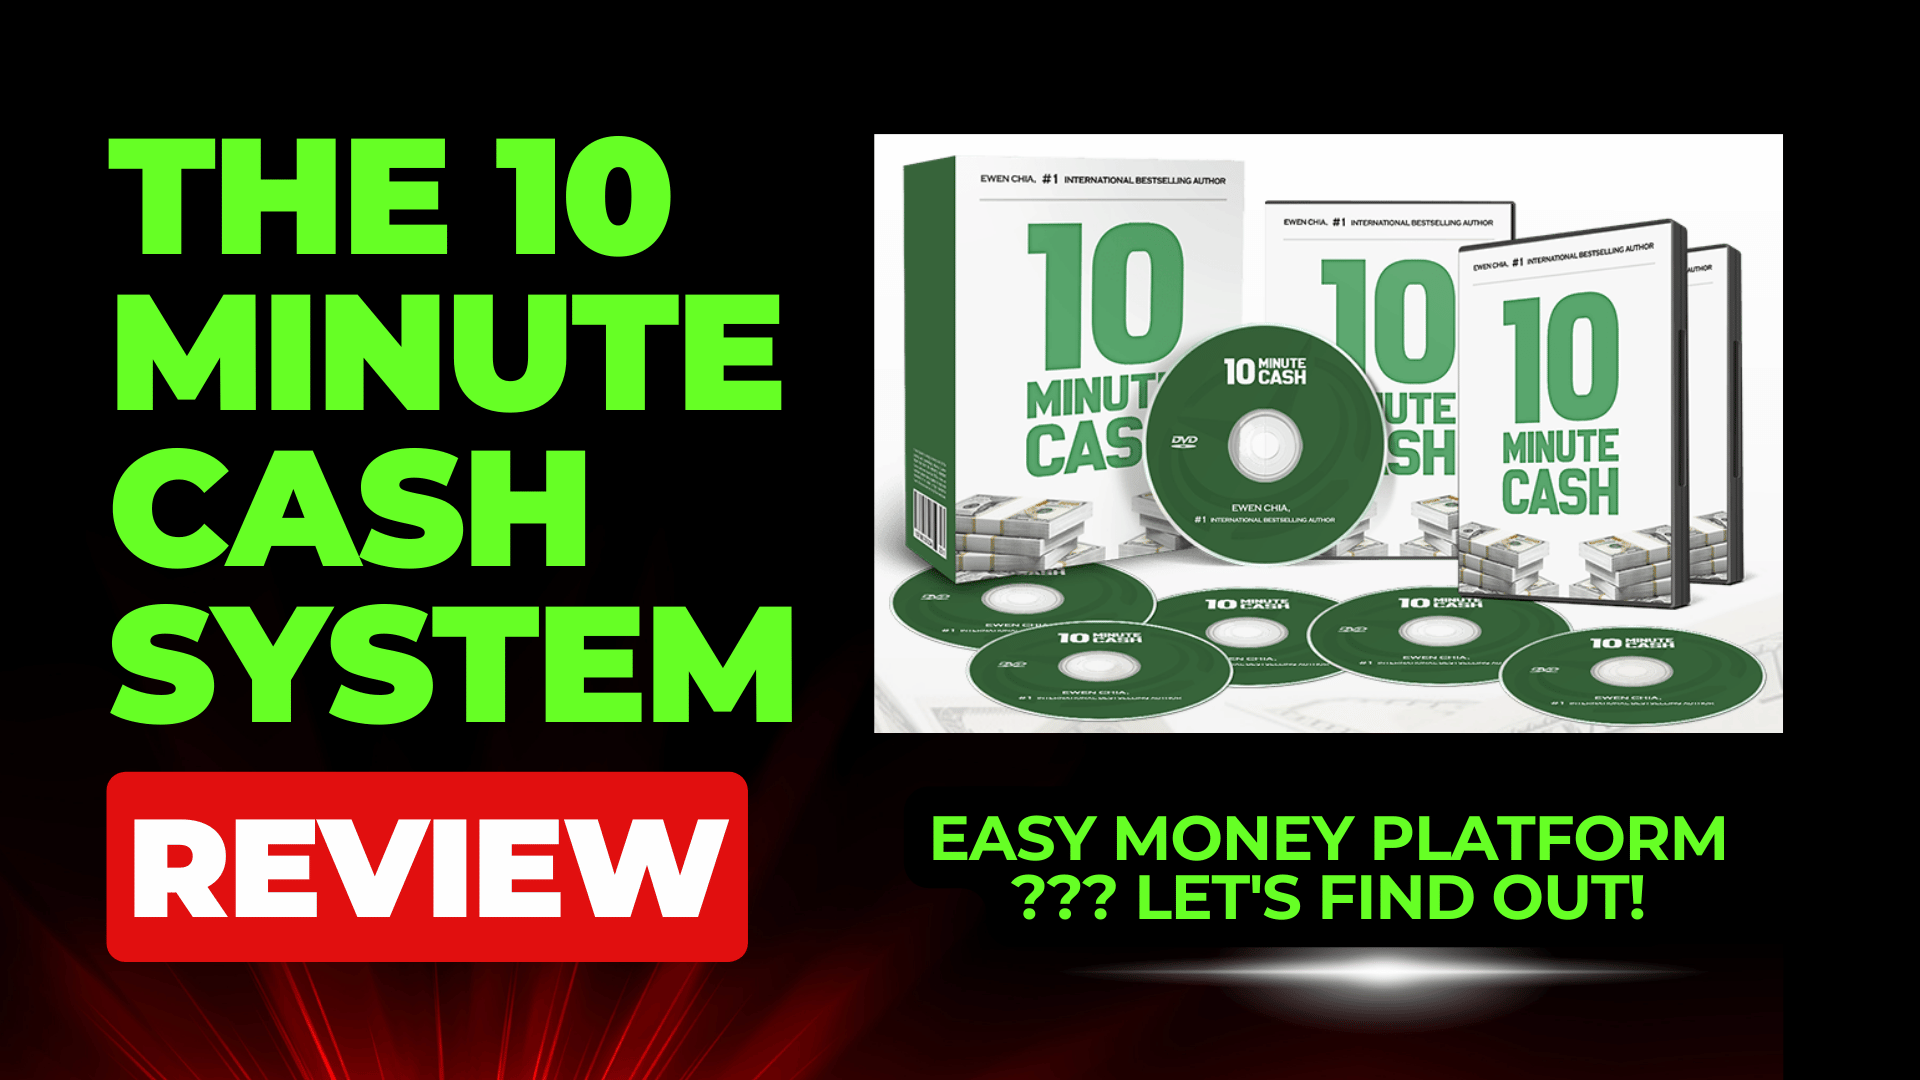 The 10 Minute Cash System Review